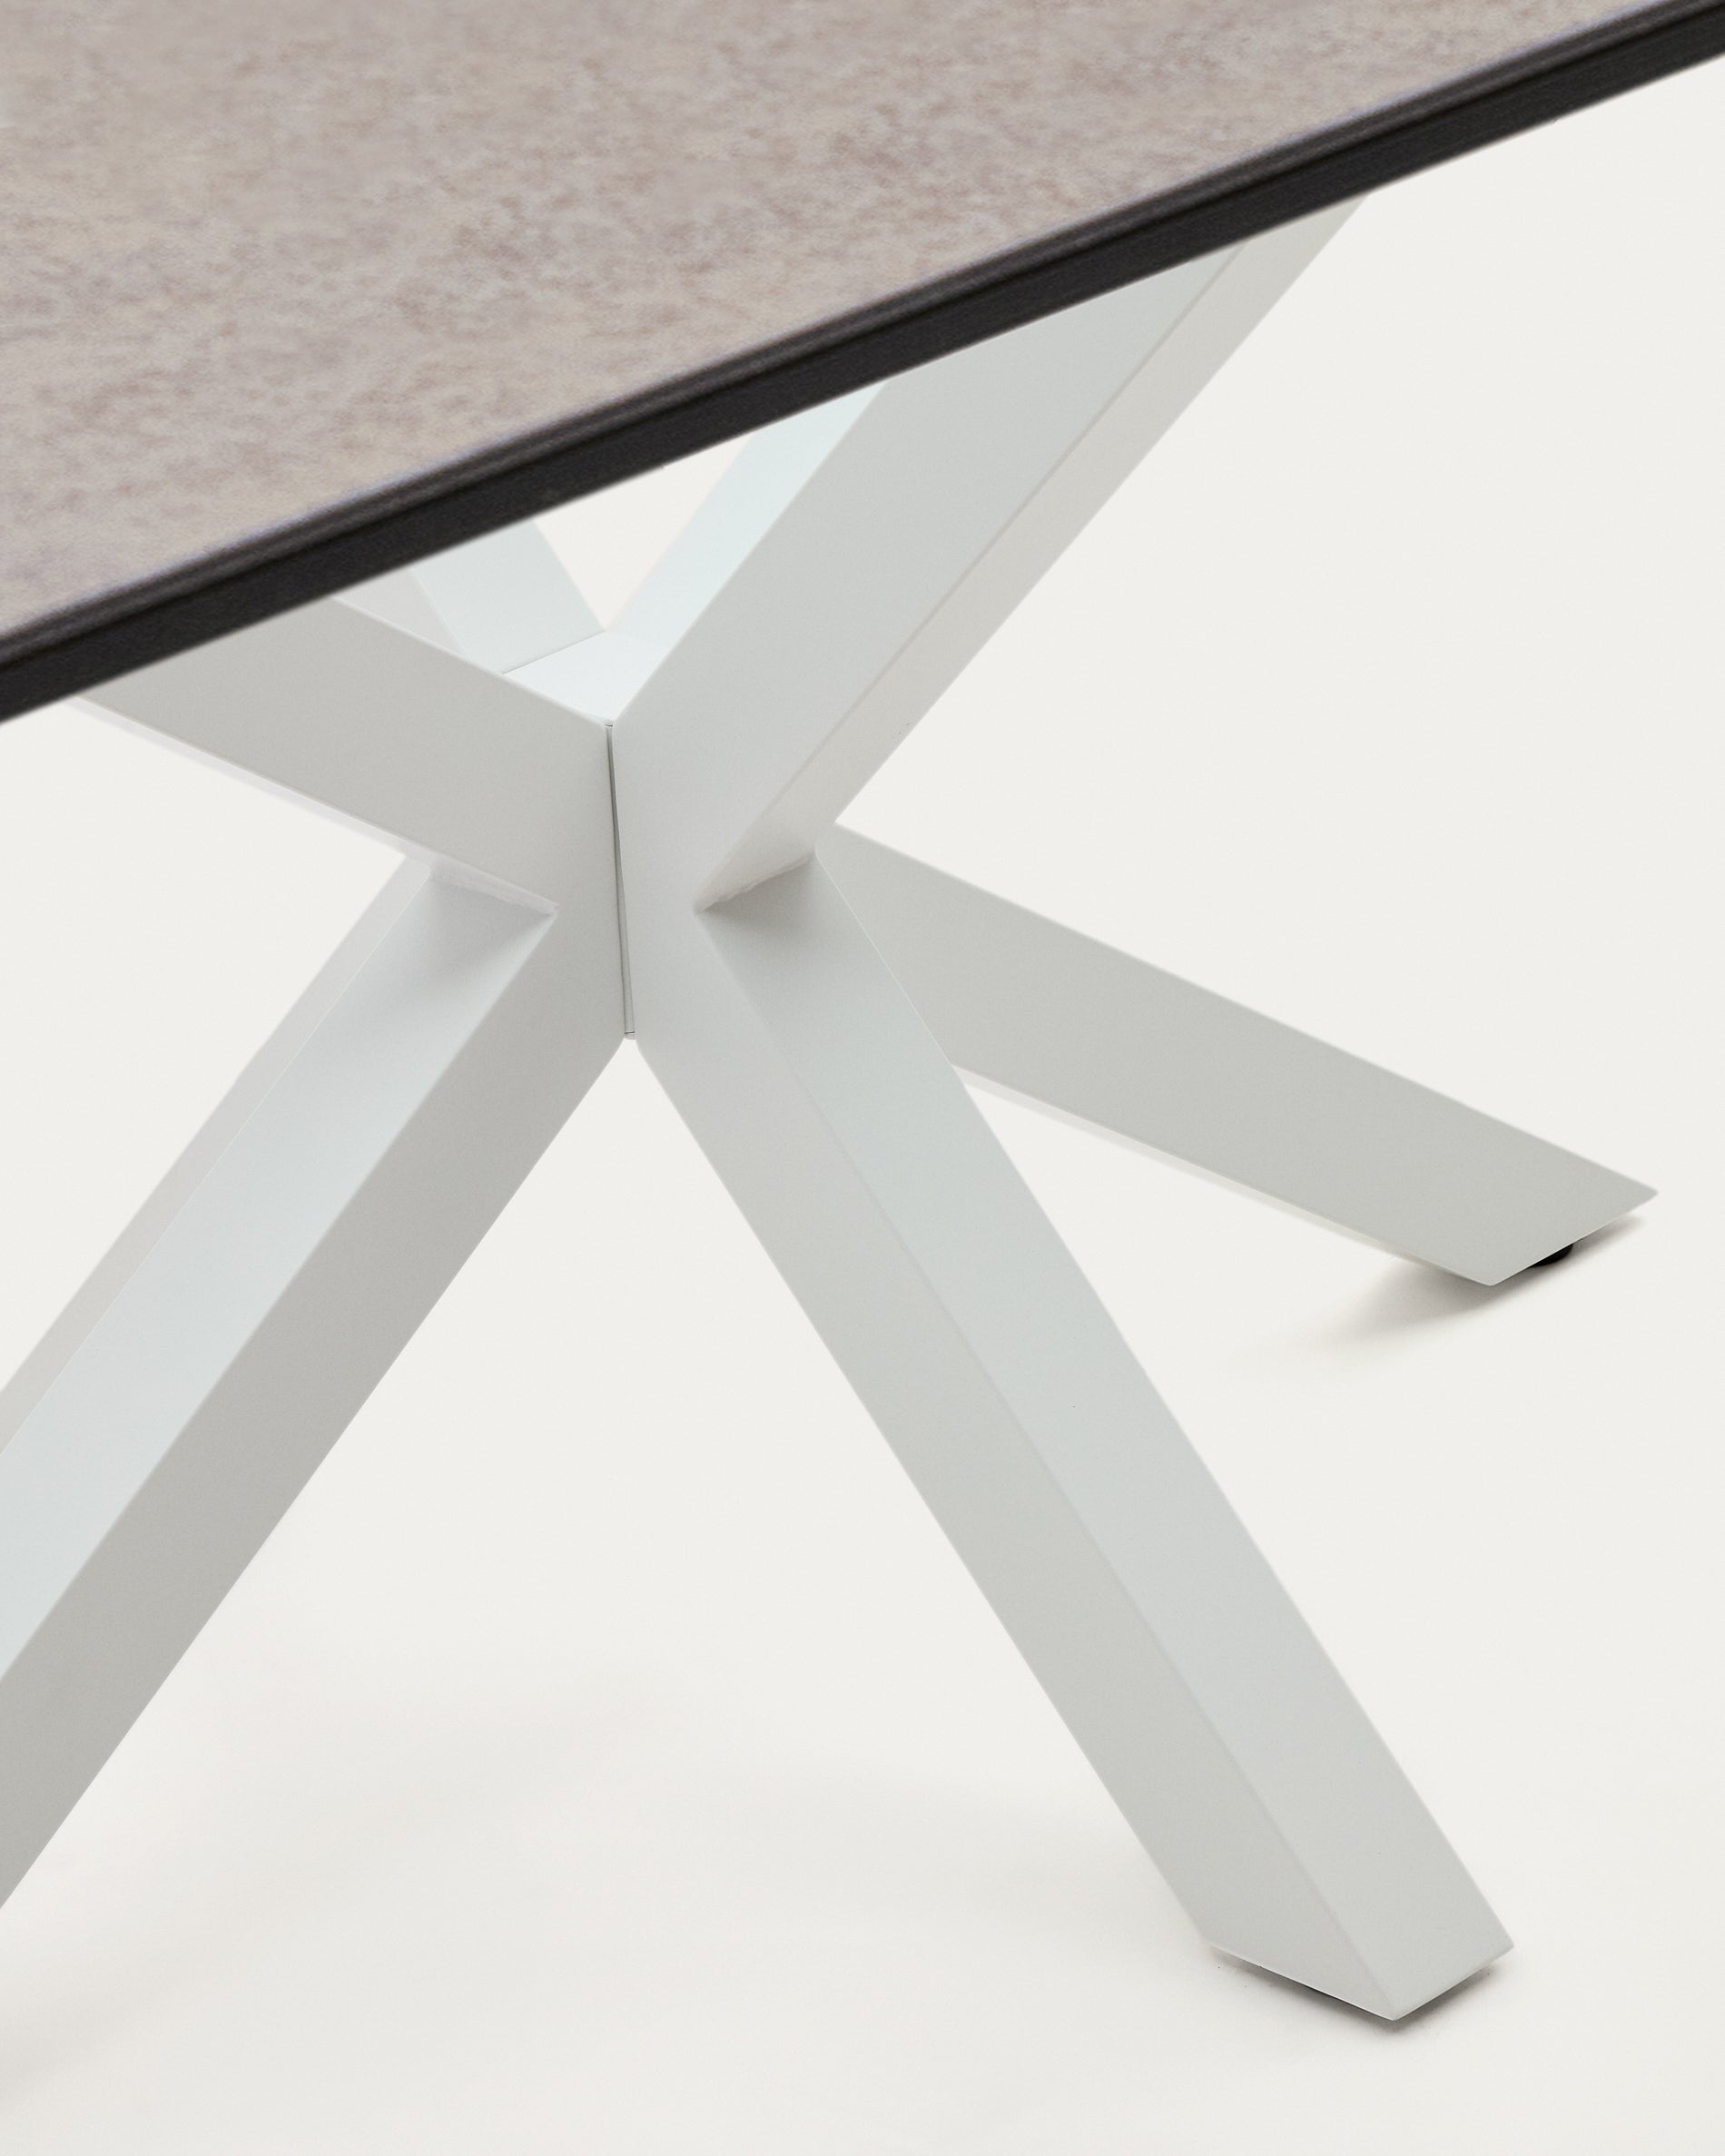 Argo table in Iron Moss porcelain and steel legs, white finish, 160 x 90 cm